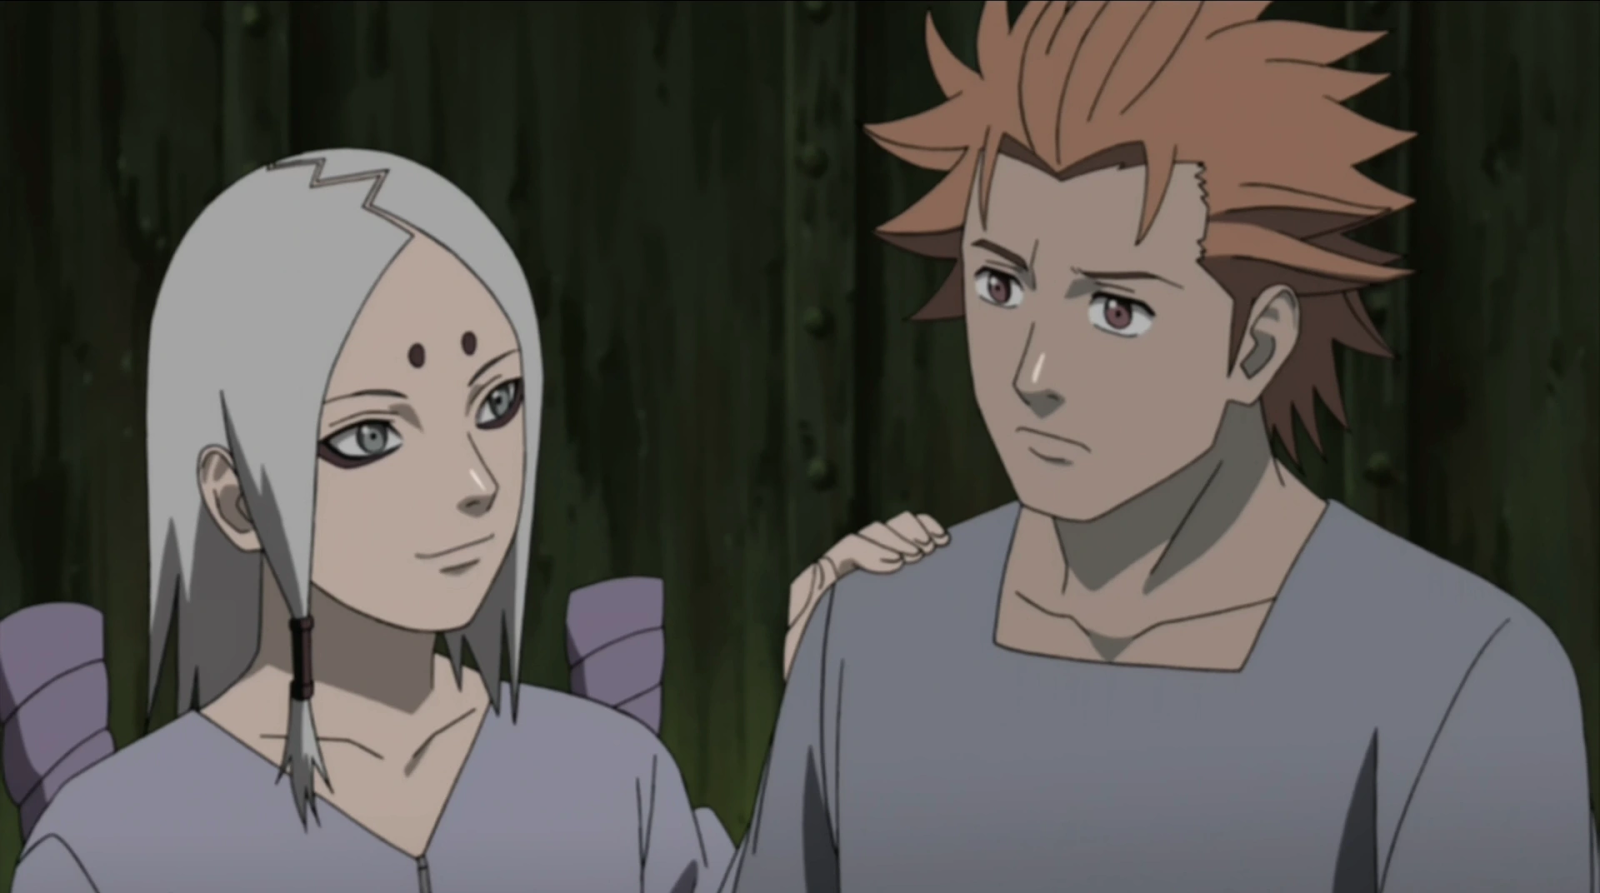 Who is Kimimaro in Naruto?